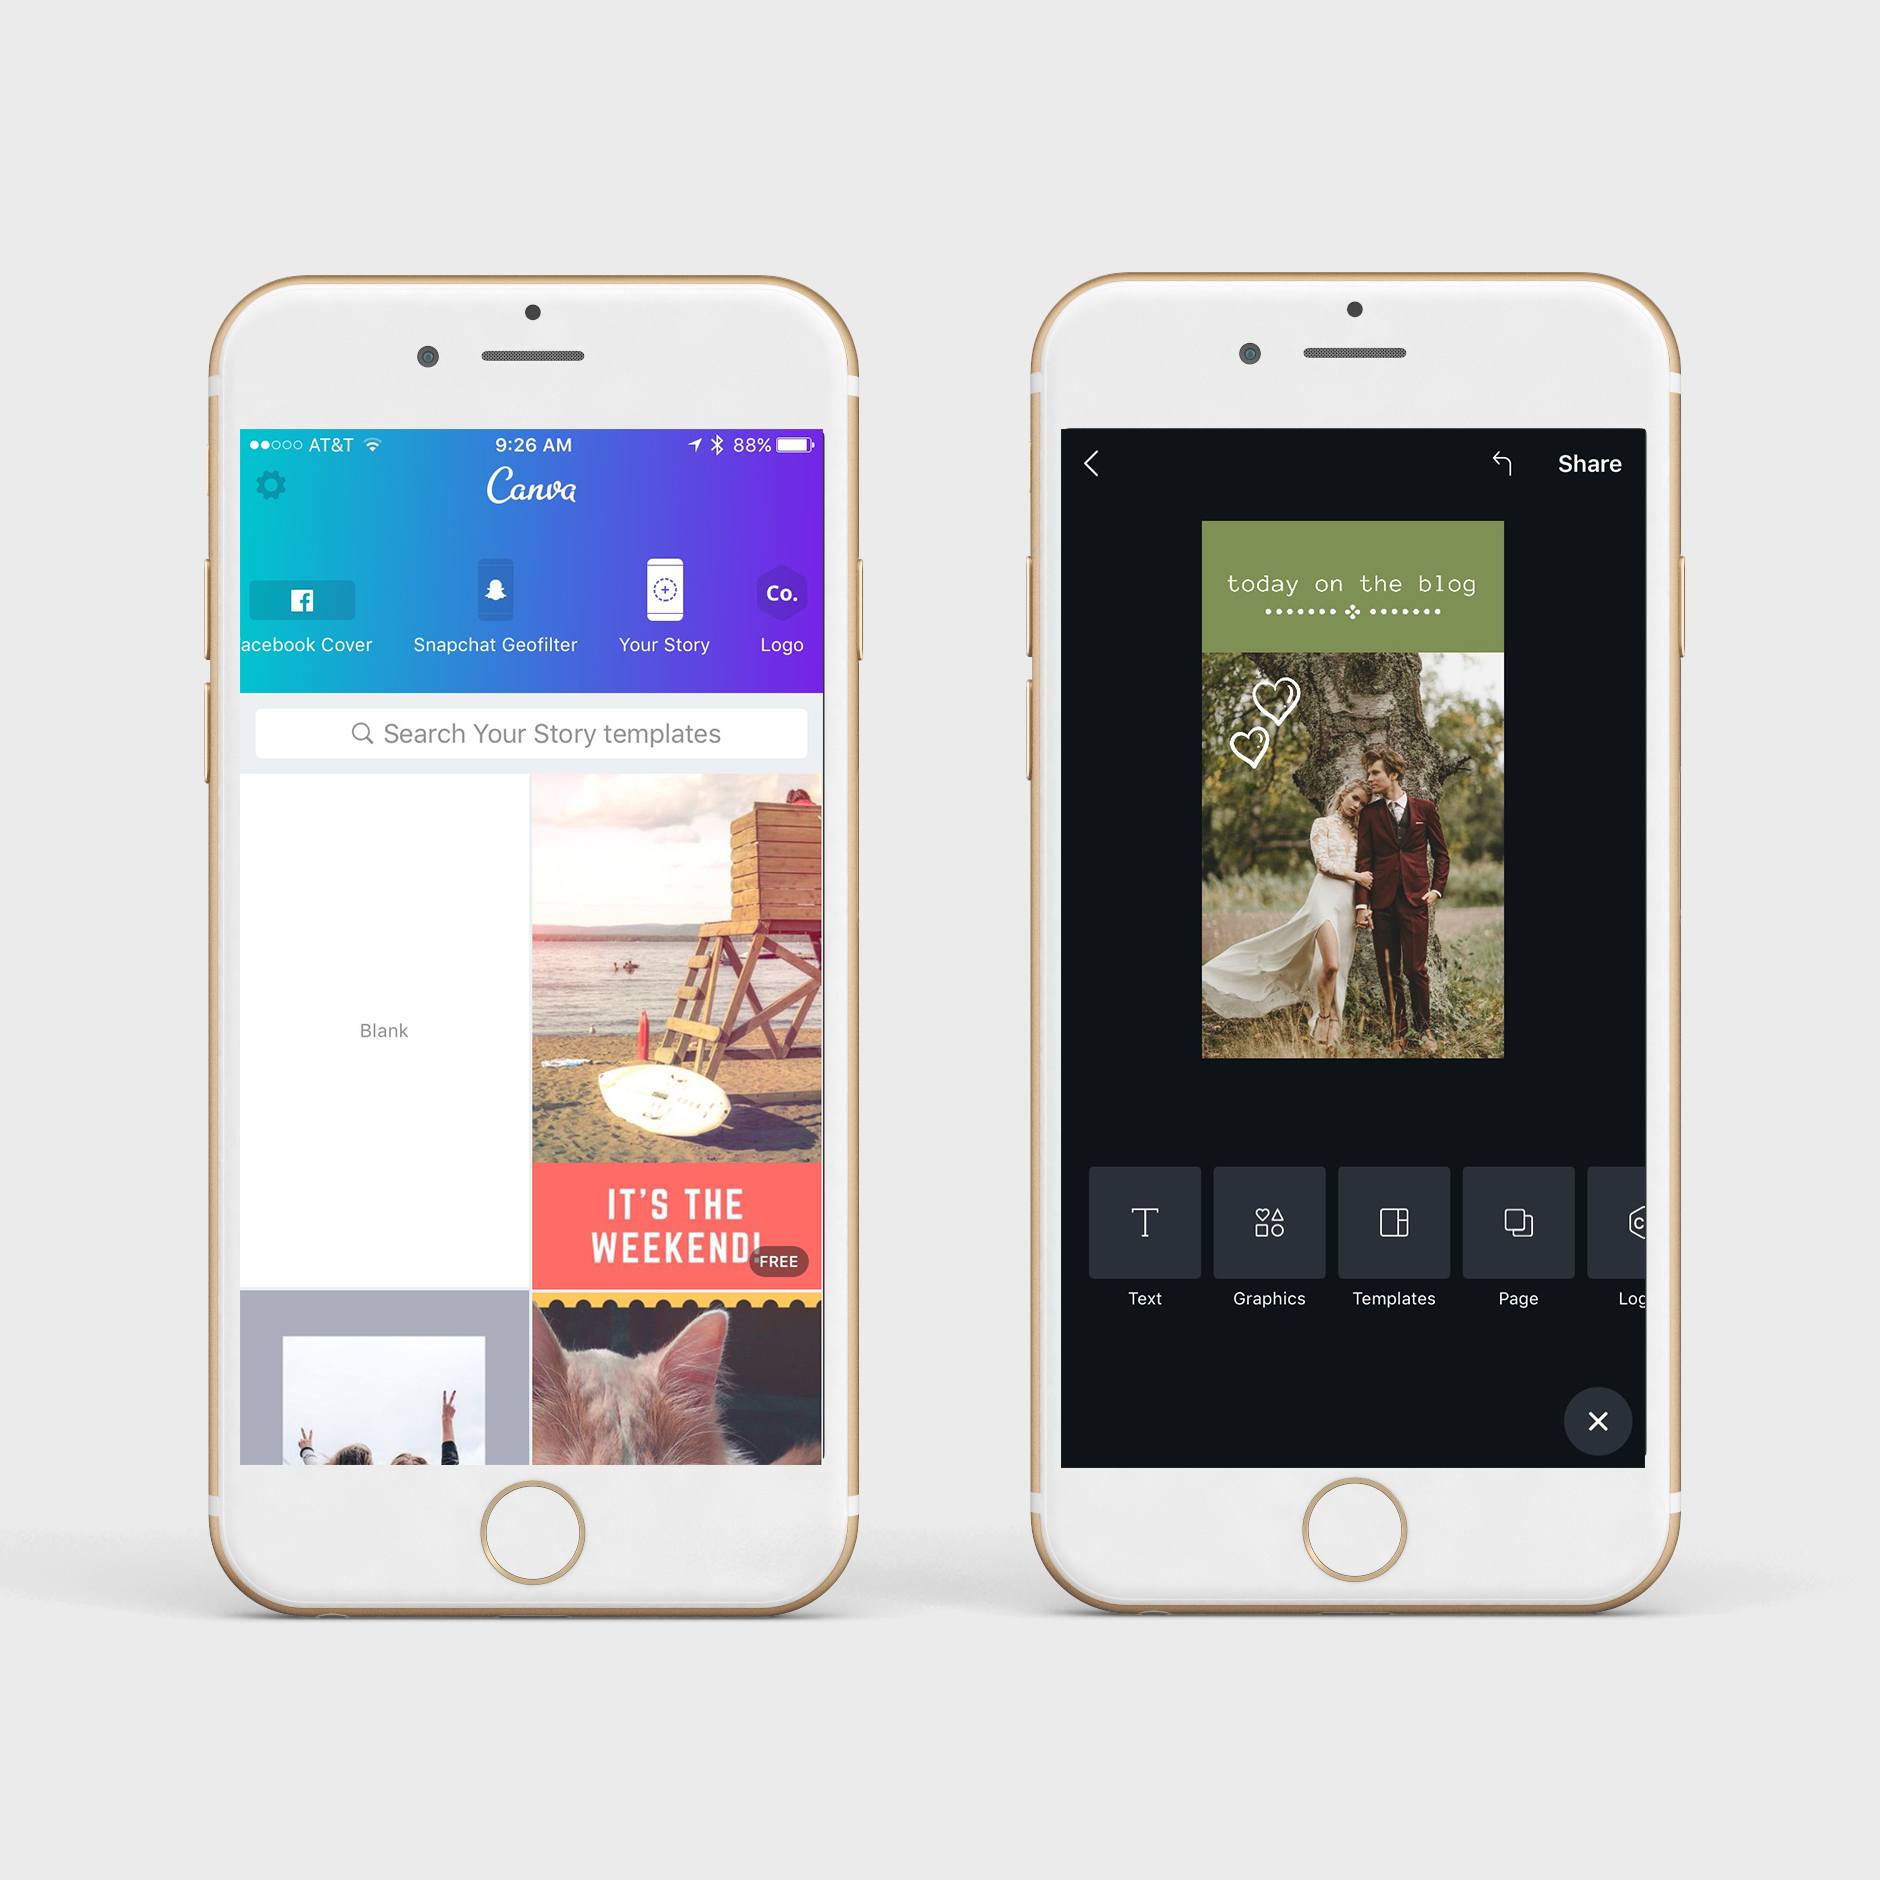 Canva is a useful phone app for Instagram Stories